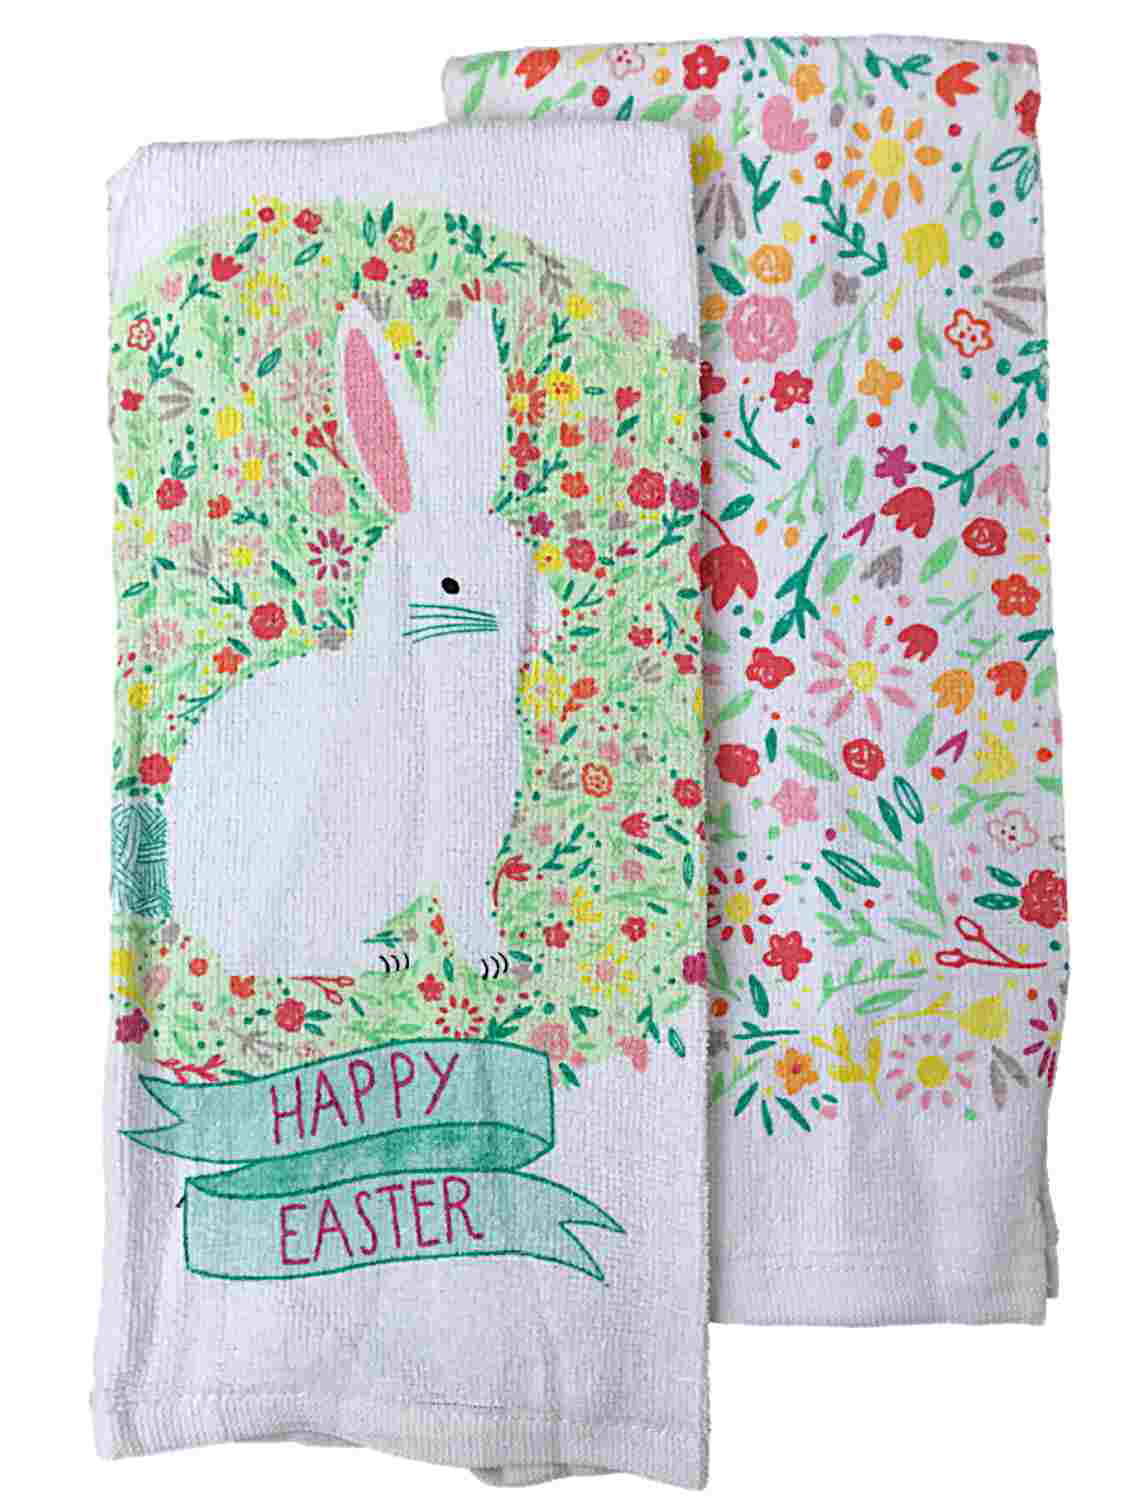 EASTER BUNNY & FLOWERS,SPRING IS HERE,EH 15x25" Details about   2 DIFFERENT PRINTED TERRY TOWELS